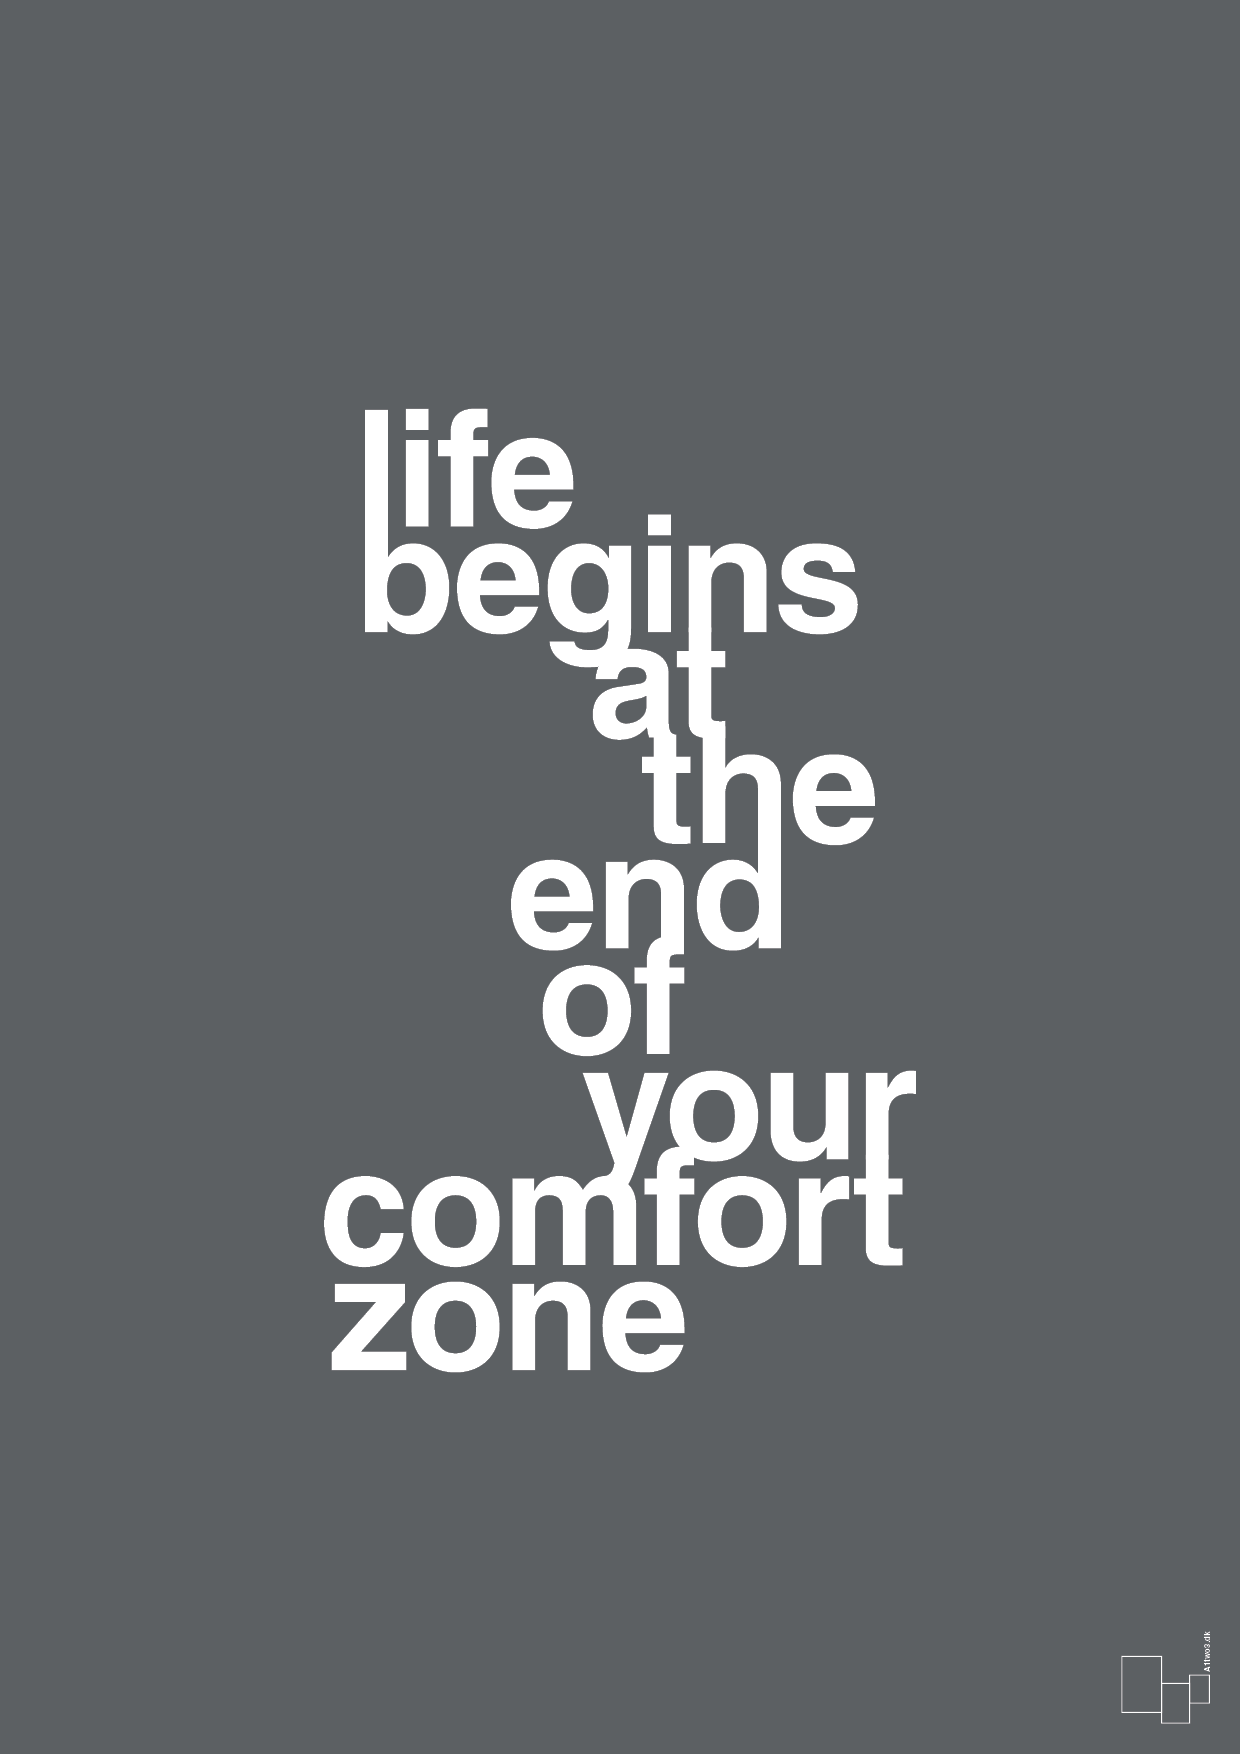 life begins at the end of your comfort zone - Plakat med Ordsprog i Graphic Charcoal